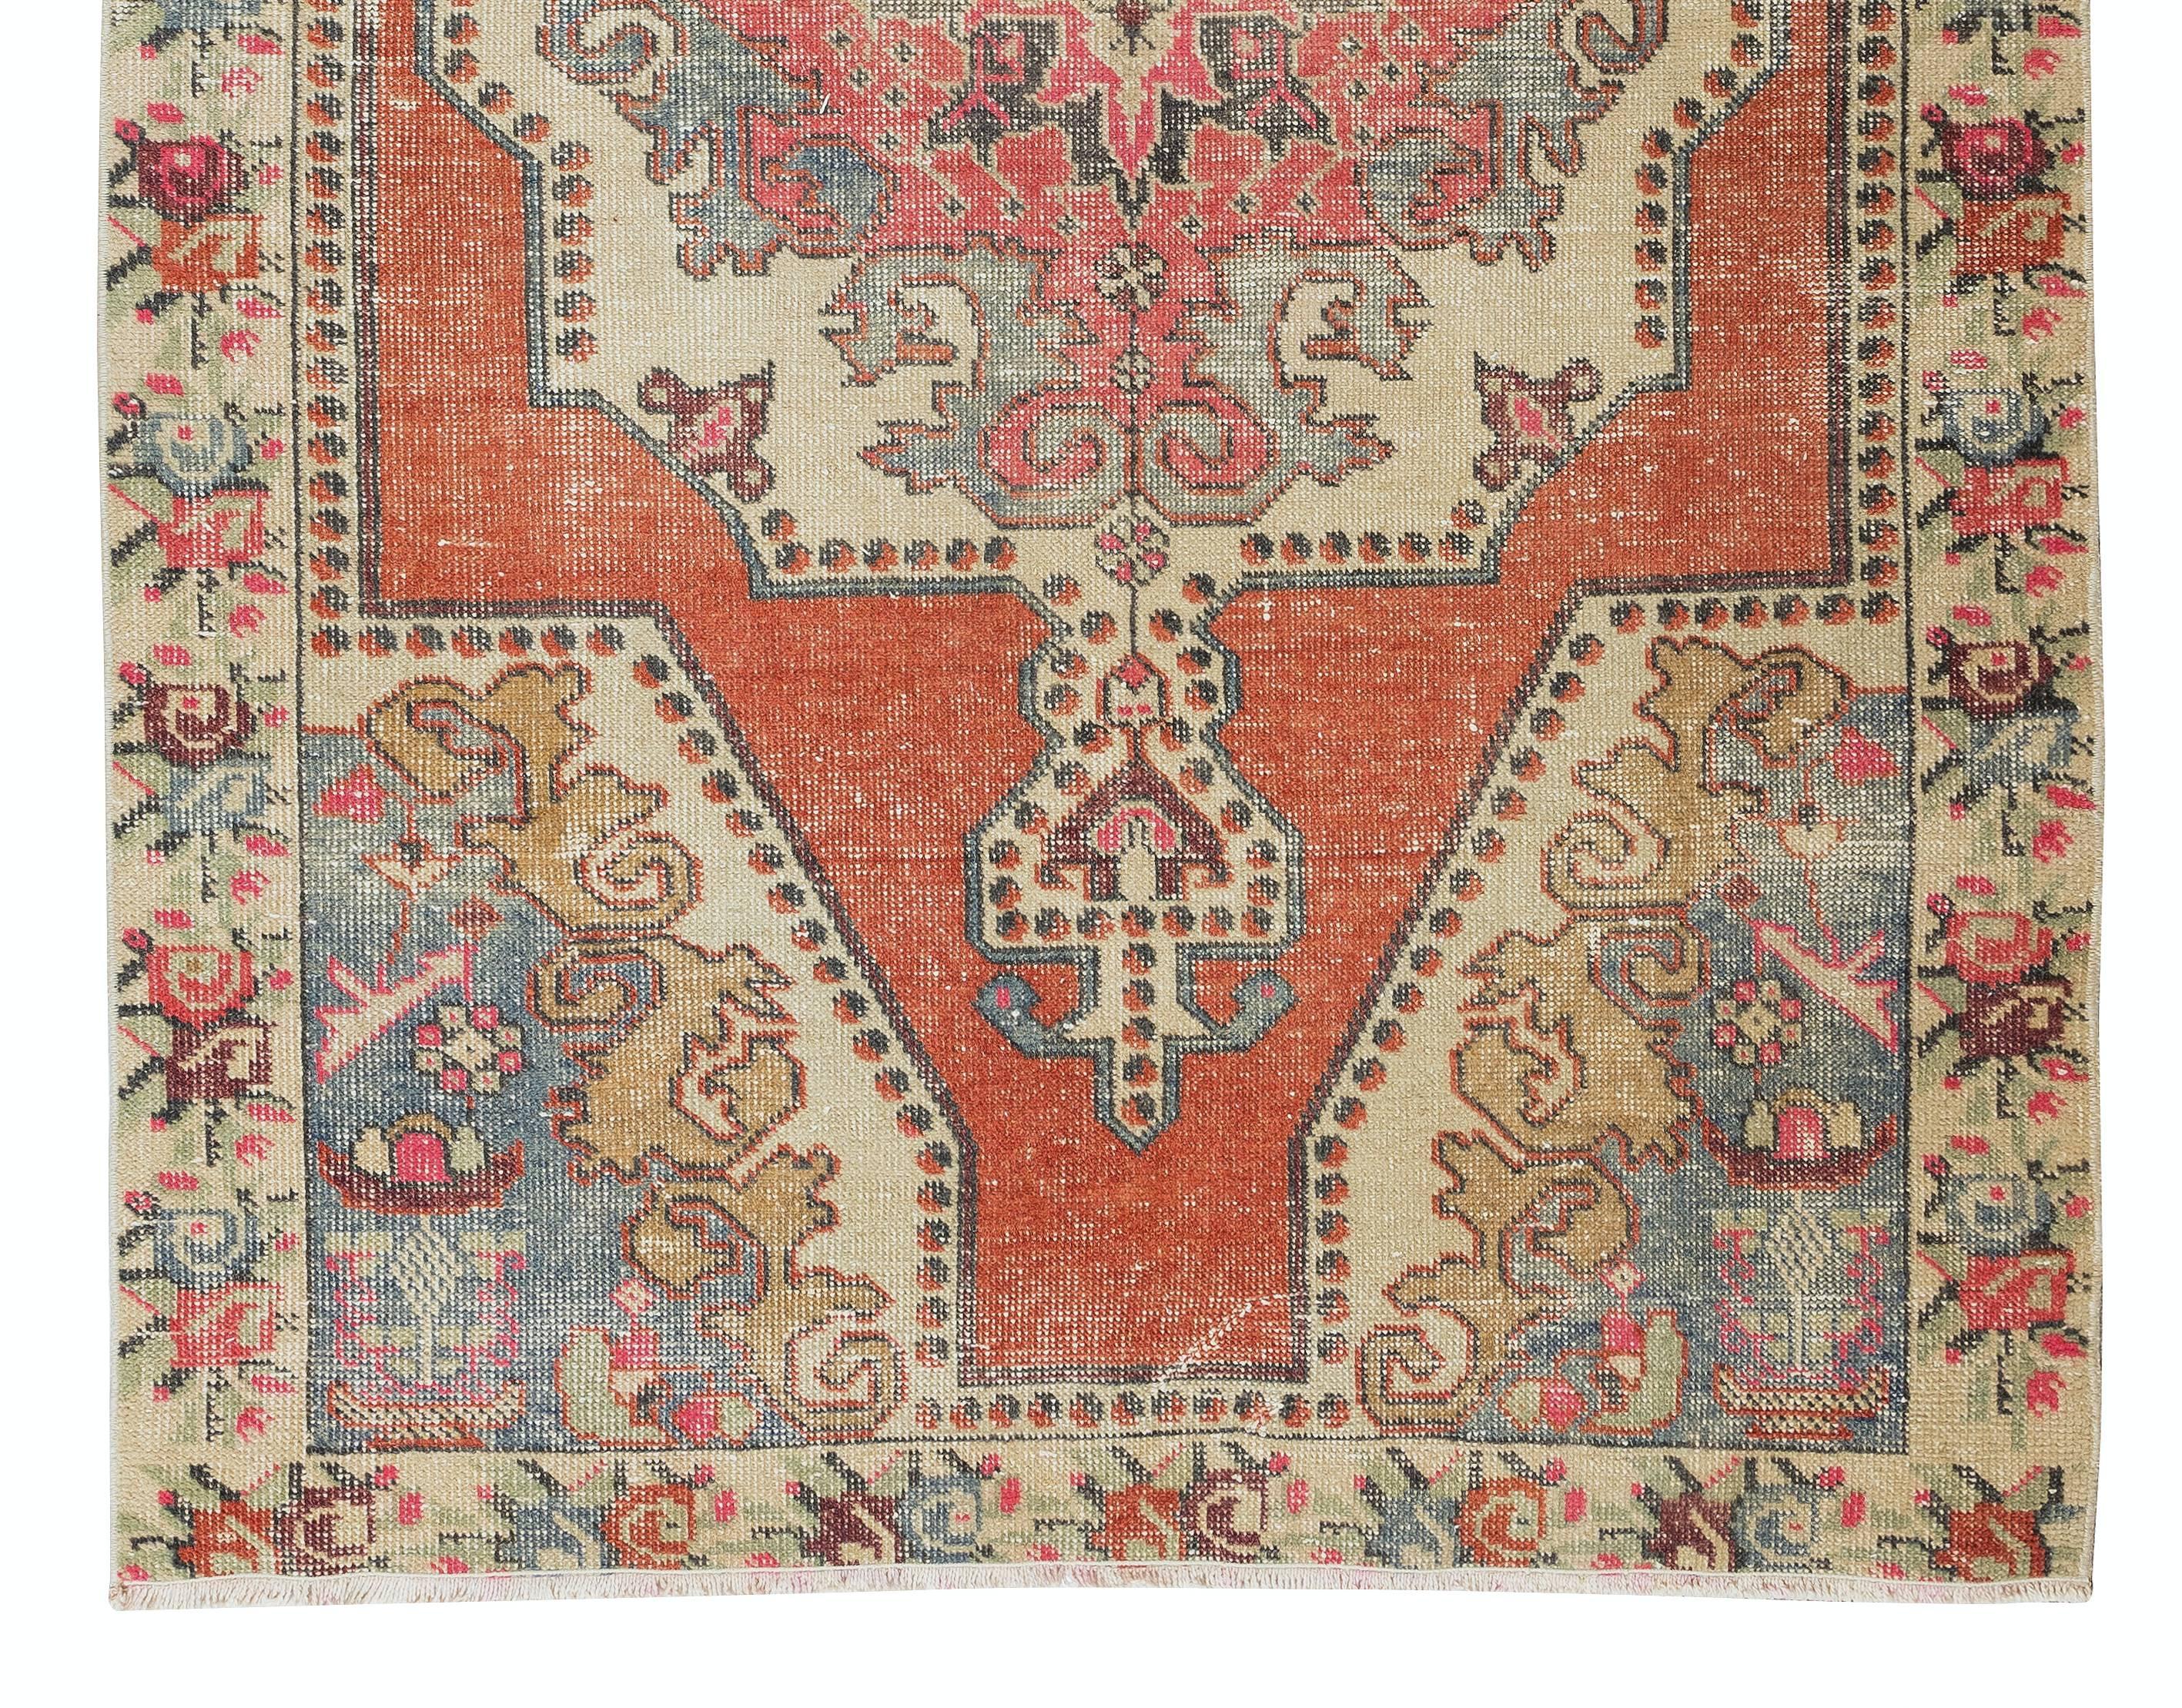 Vintage Hand Knotted Turkish Wool Rug, One-of-a-kind Geometric Carpet In Good Condition For Sale In Philadelphia, PA